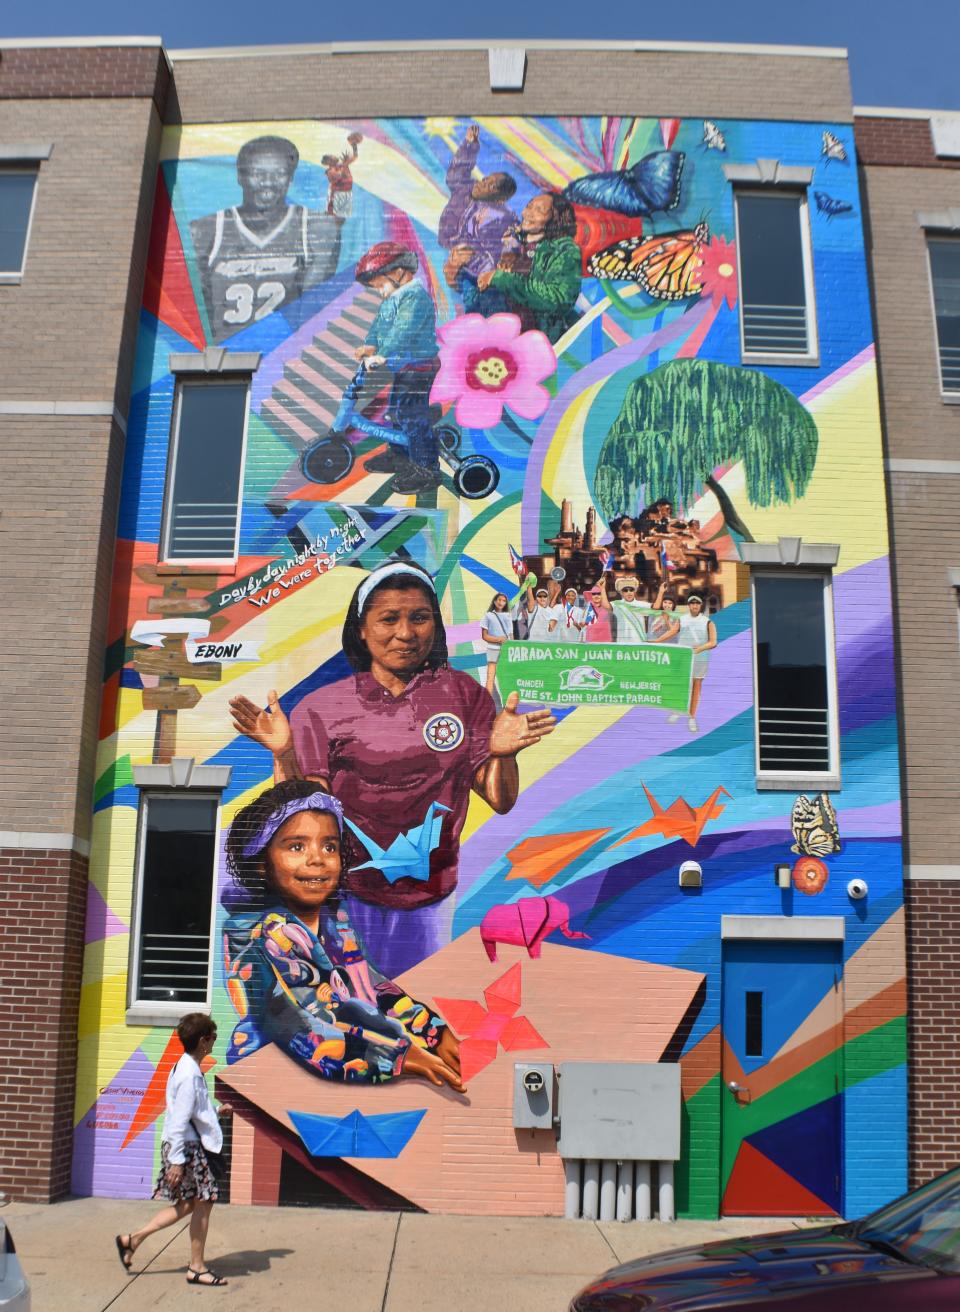 Camden's newest piece of public art is a three-story mural in the Lanning Square neighborhood.